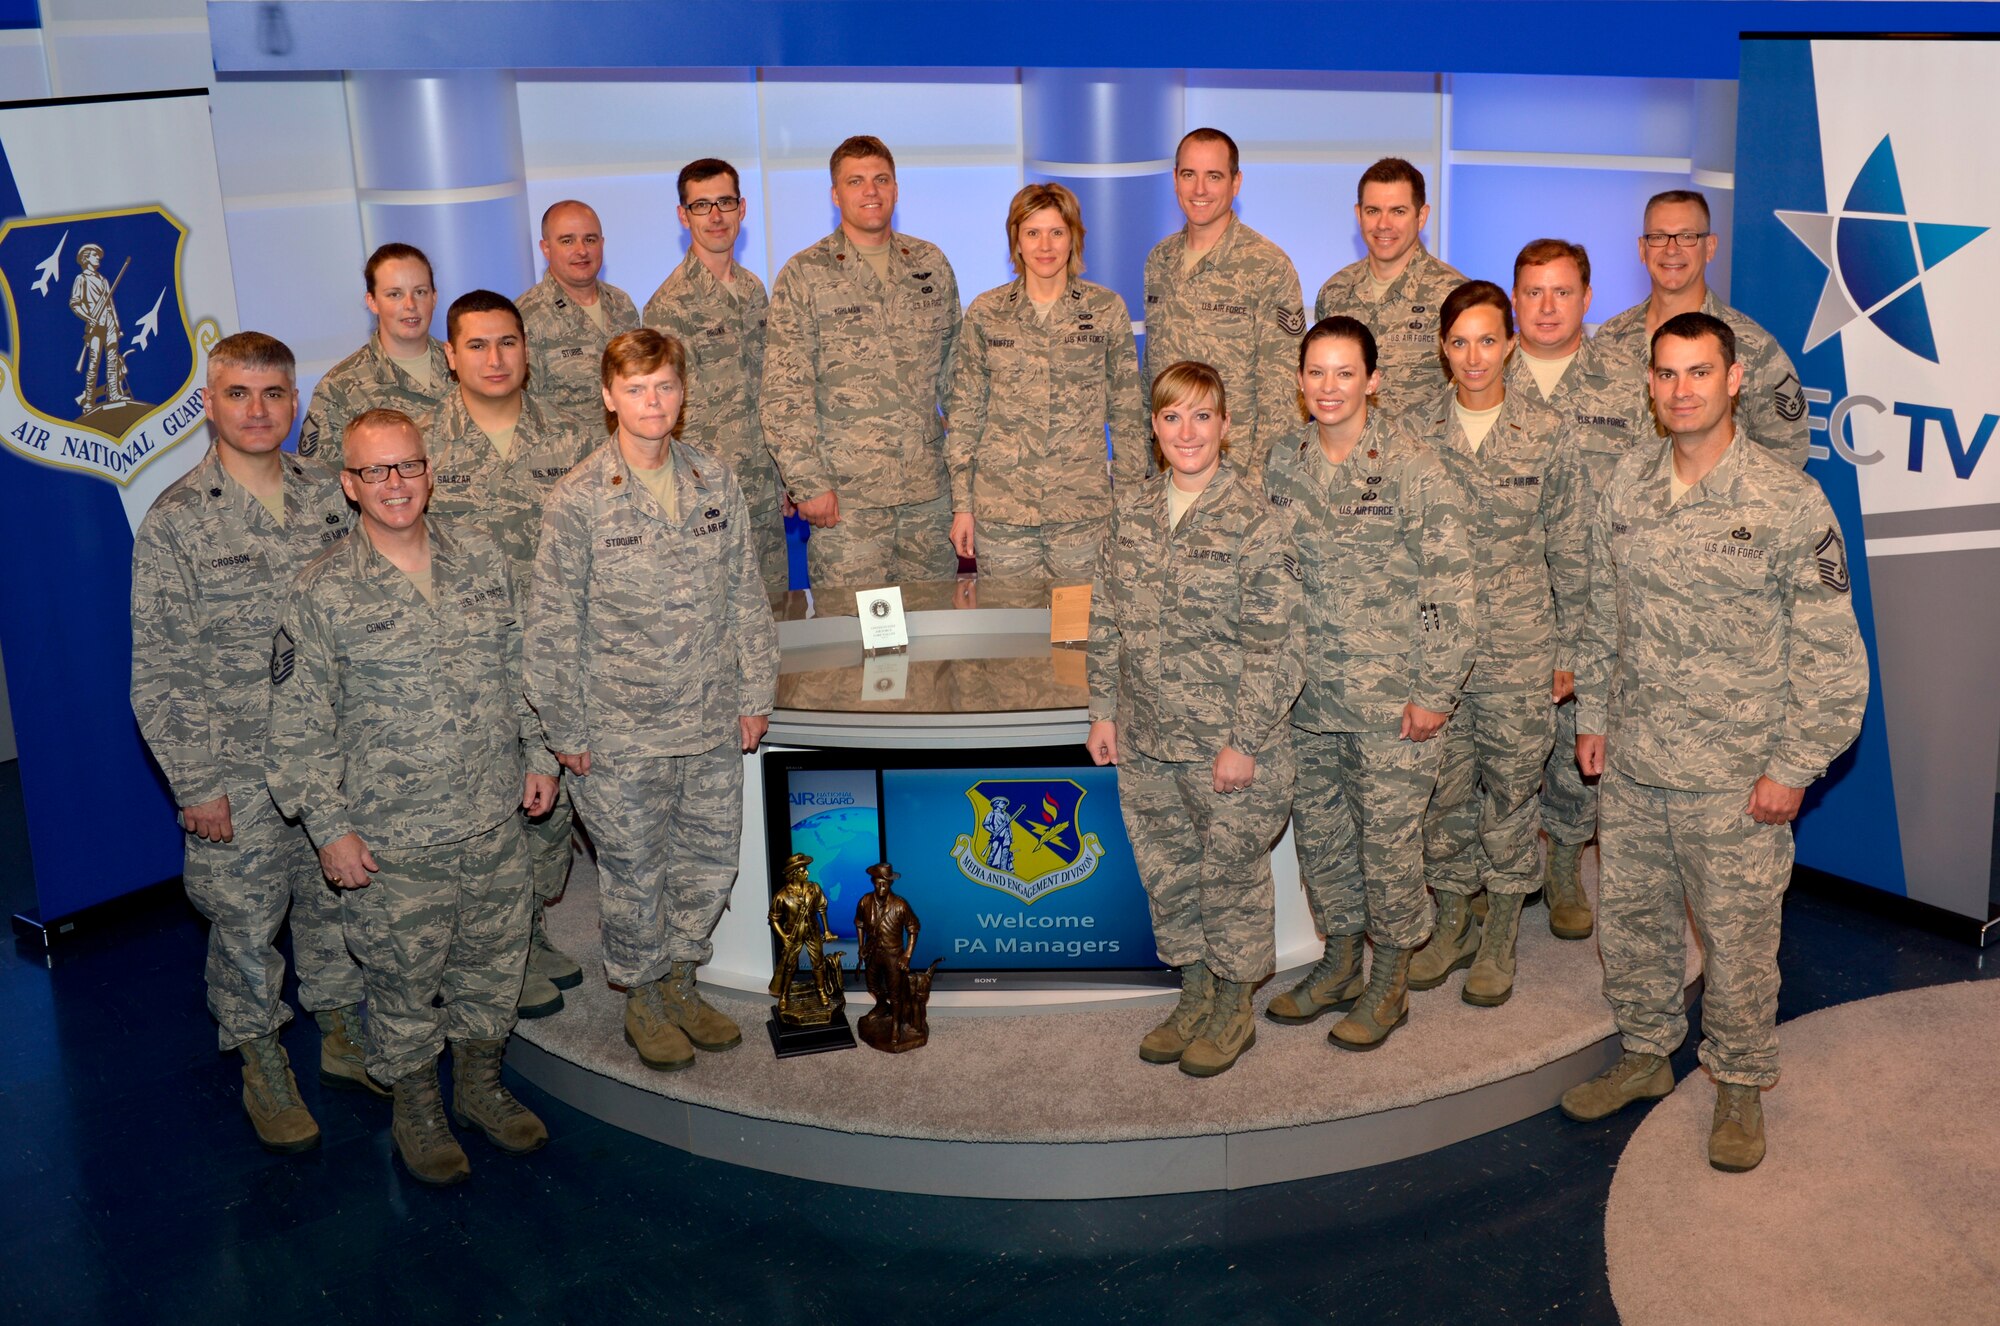 MCGHEE TYSON AIR NATIONAL GUARD BASE, Tenn. – Instructors, a guest speaker and students of the I.G. Brown Training and Education Center's Public Affairs Managers Course tour the TEC TV Broadcast Studio - home of the Warrior Network - here, July 17, 2013, as part of a meet and greet with the Center's Media and Engagement Division personnel. (U.S. Air National Guard photo by Master Sgt. Kurt Skoglund/Released)